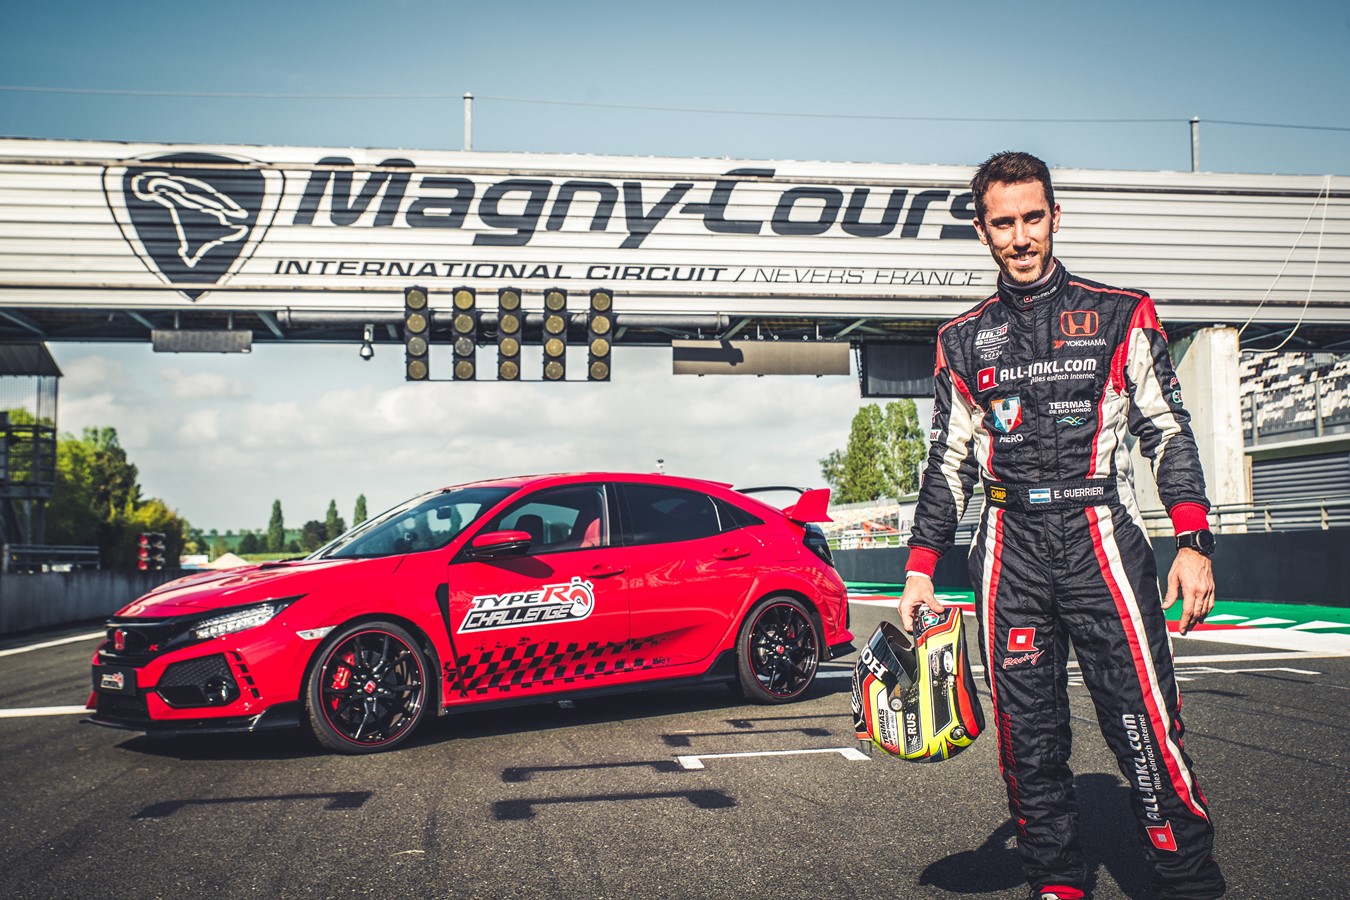 ‘Type R Challenge 2018’ is a go! Honda sets new lap record at Magny-Cours GP circuit in Civic Type R